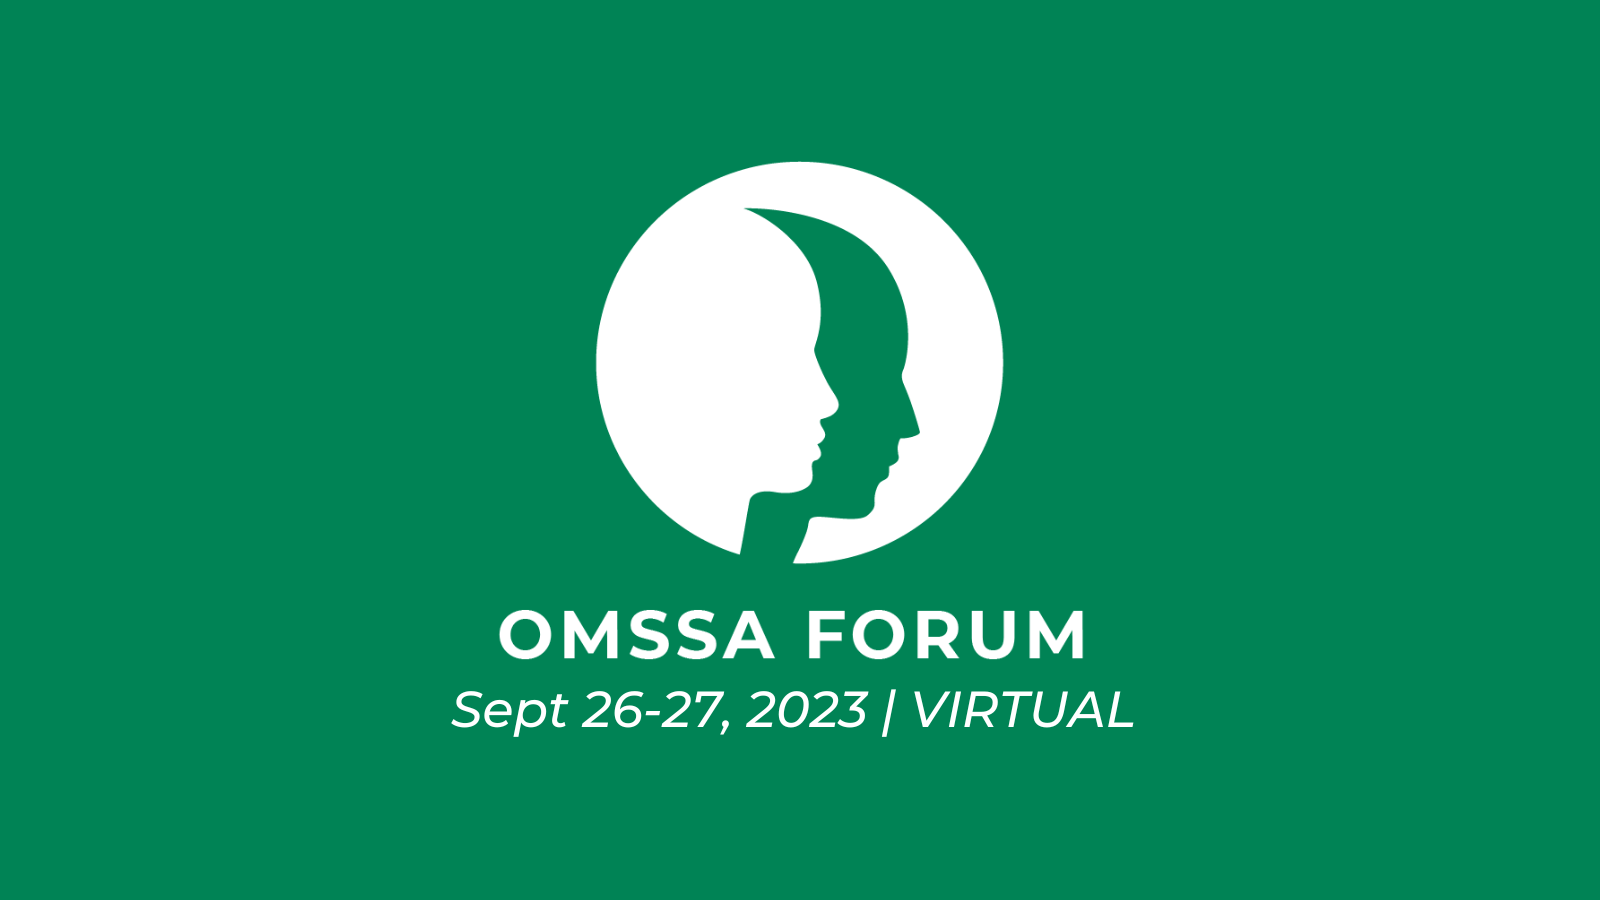 OMSSA 2023 Policy Conference